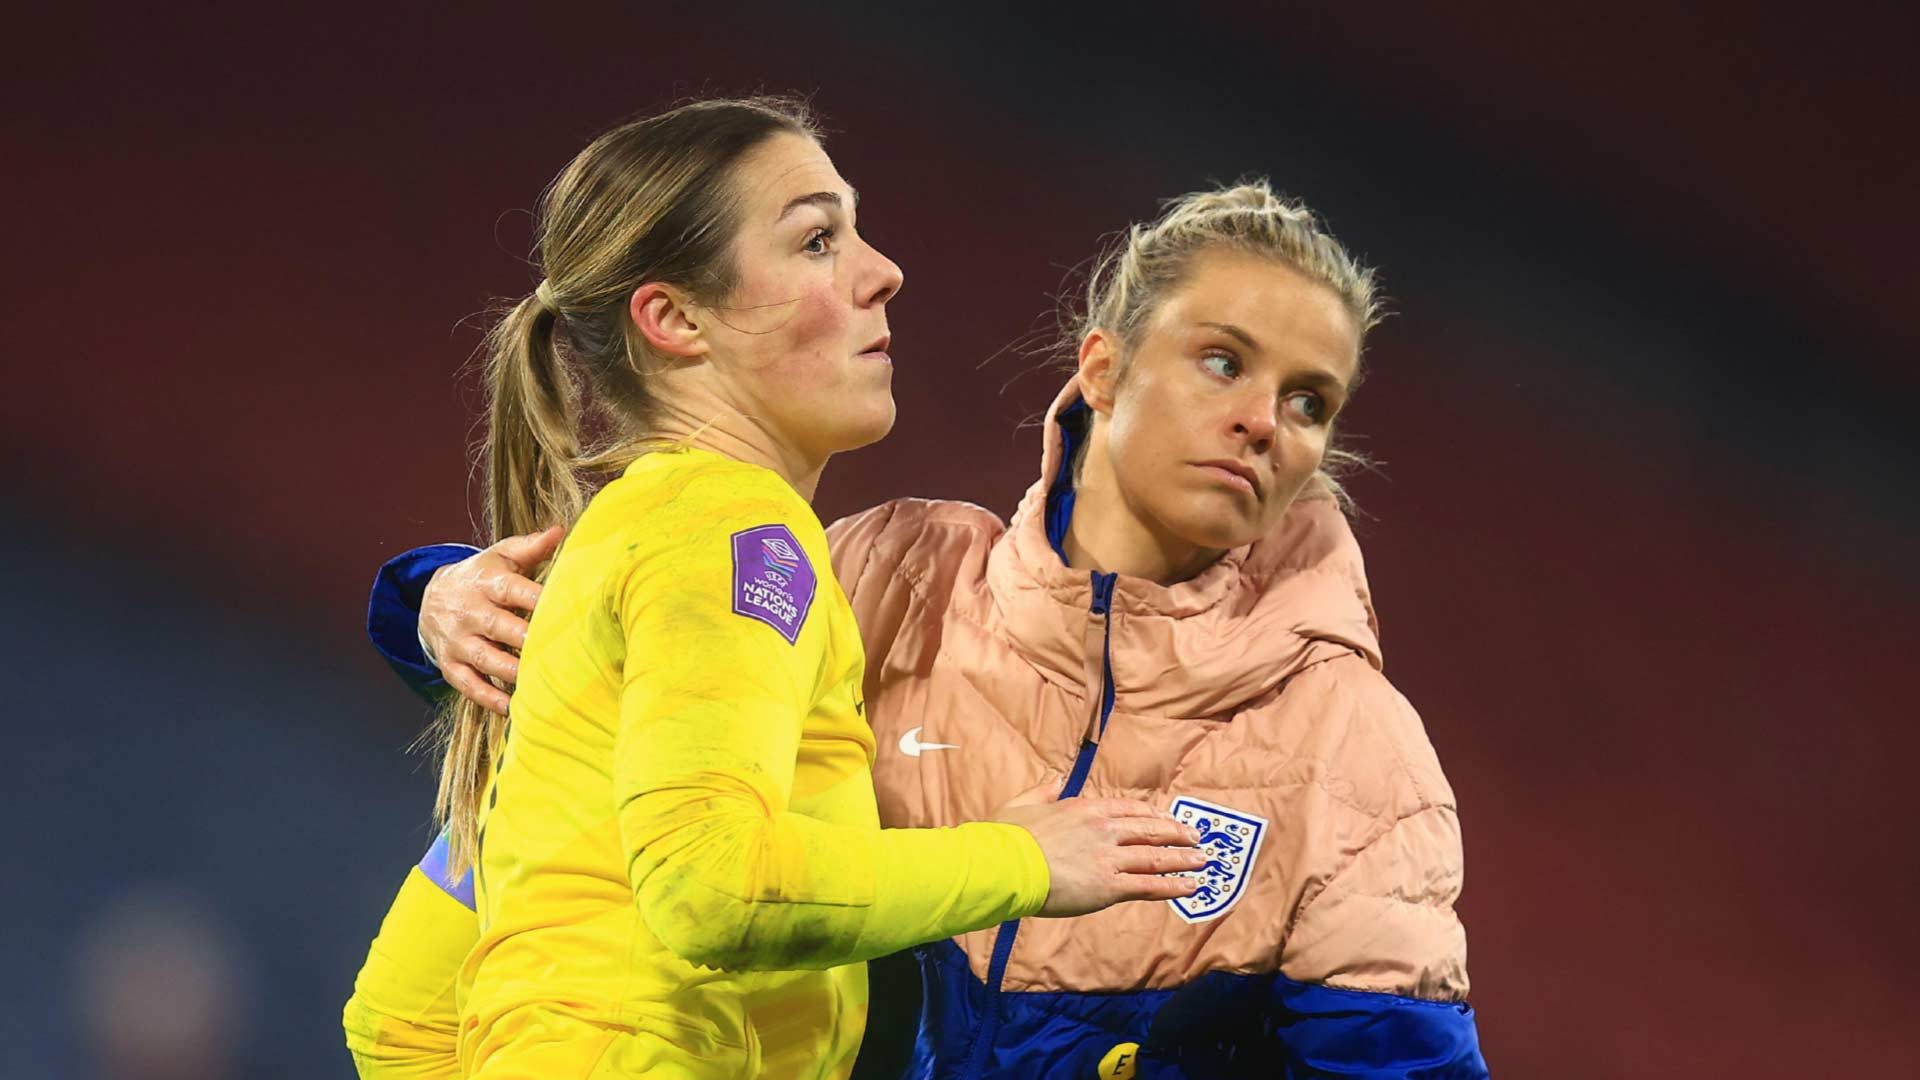 Leeds fan Rachel Daly consoling England 'keeper Mary Earps after the Lionesses missed out on qualifying for the Olympics